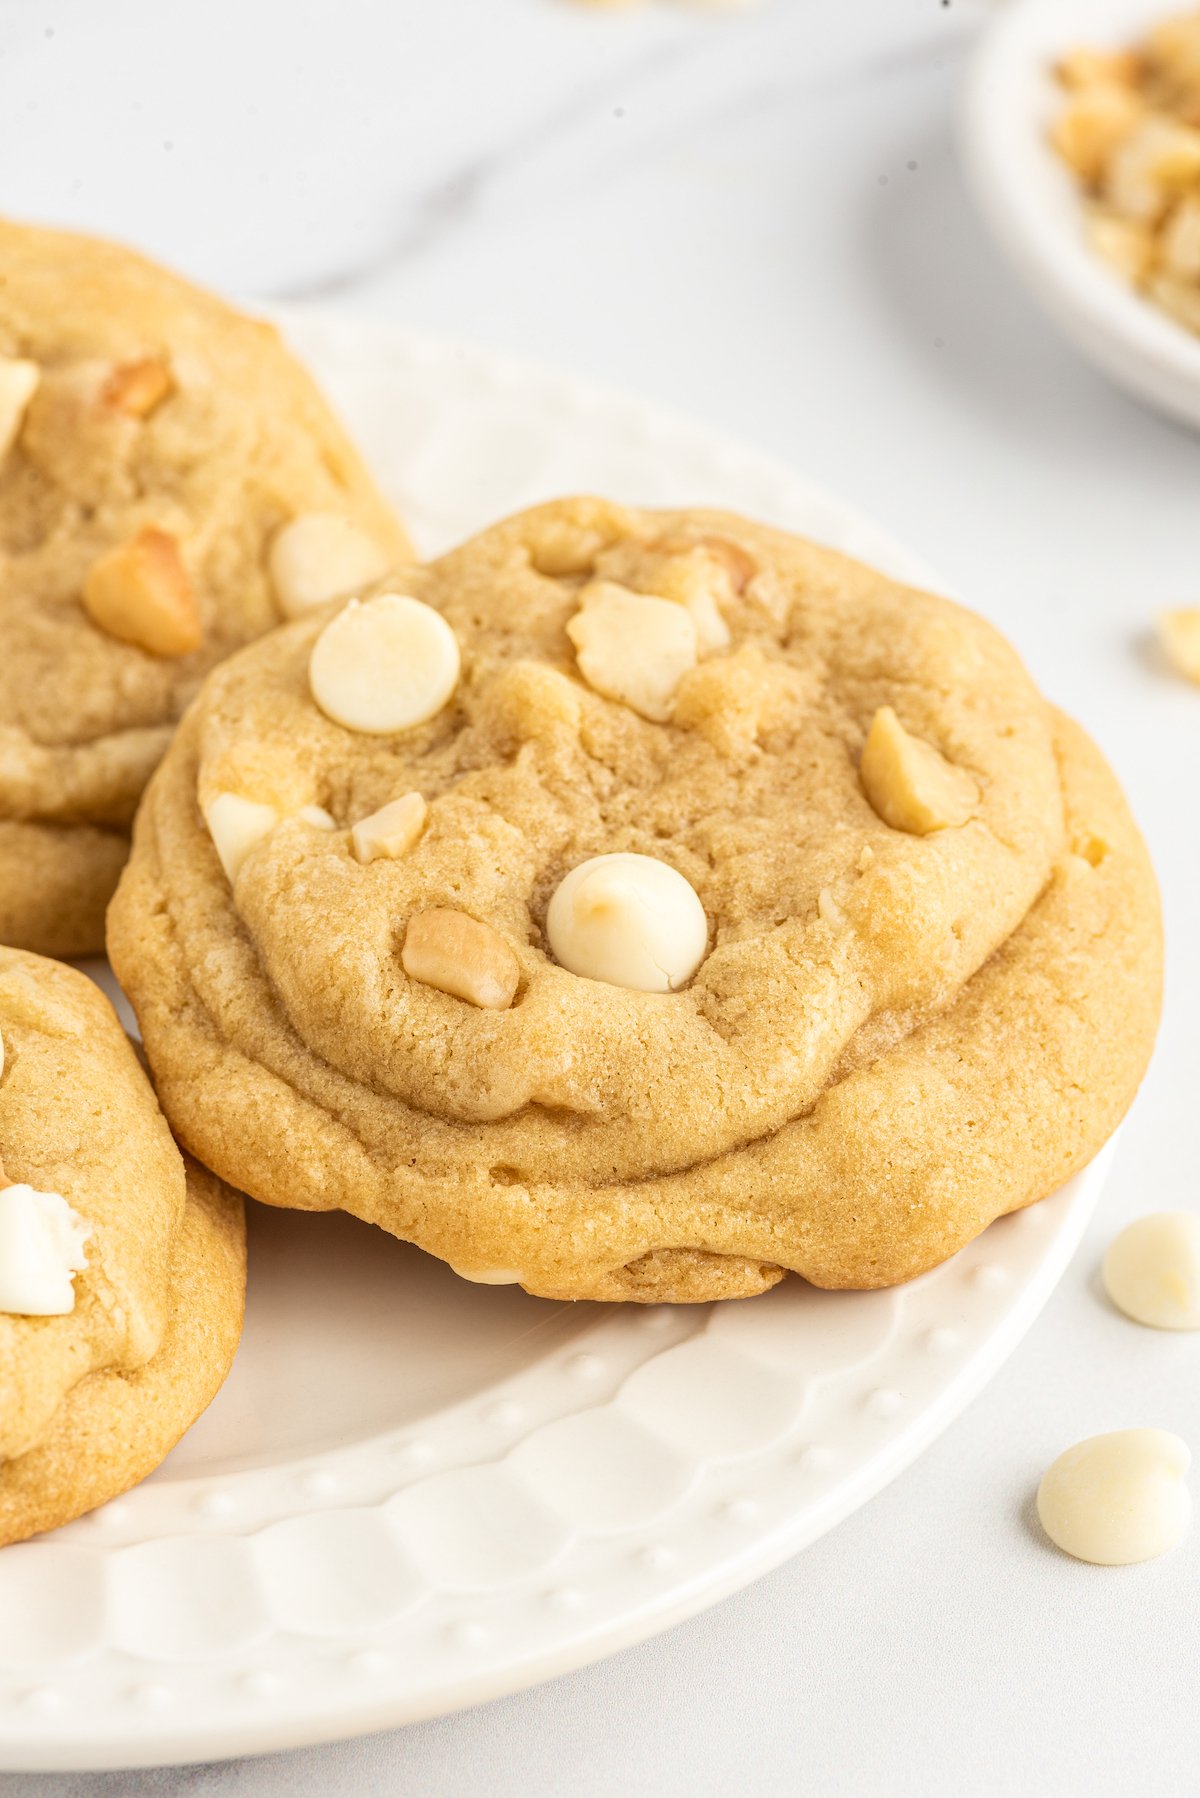 A close-up shot of a cookie with white chocolate chips and macadamia nuts.